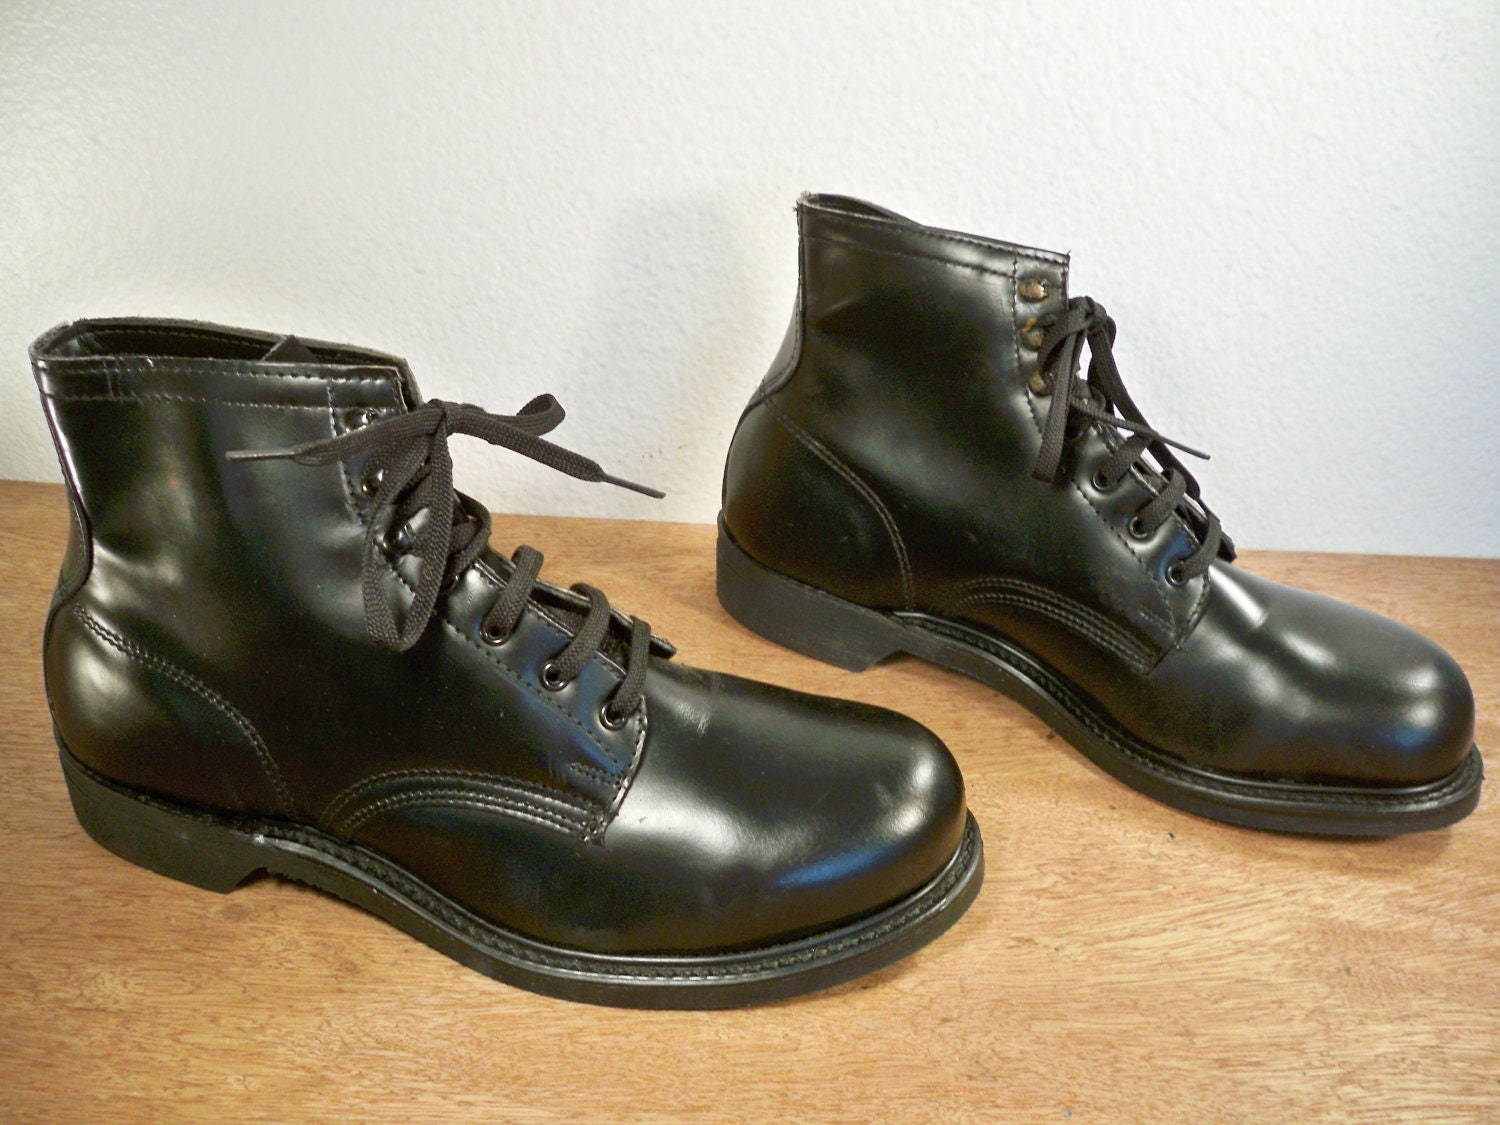 Vintage KNAPP Shoes Made in America Black Leather by Joeymest